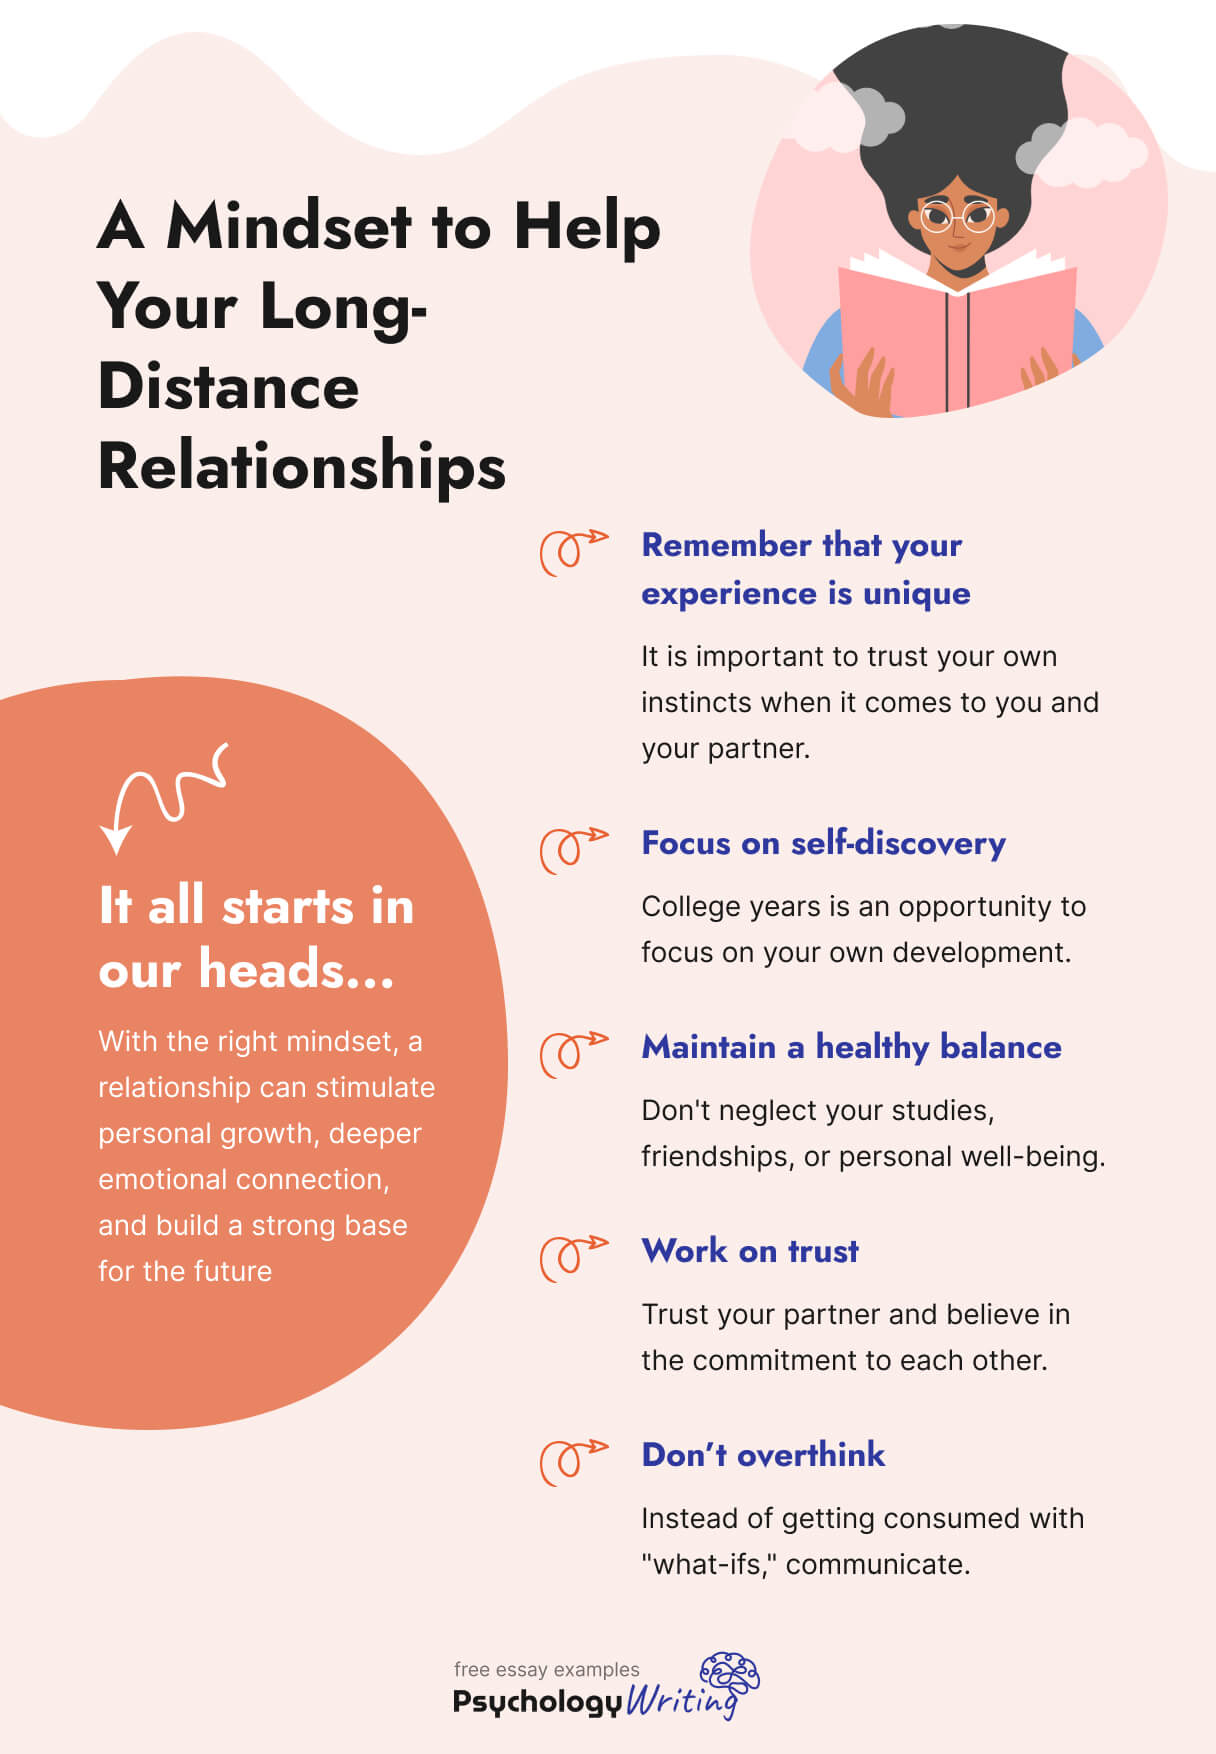 On this picture, you can see tips on how to improve your mindset to make LDR work.